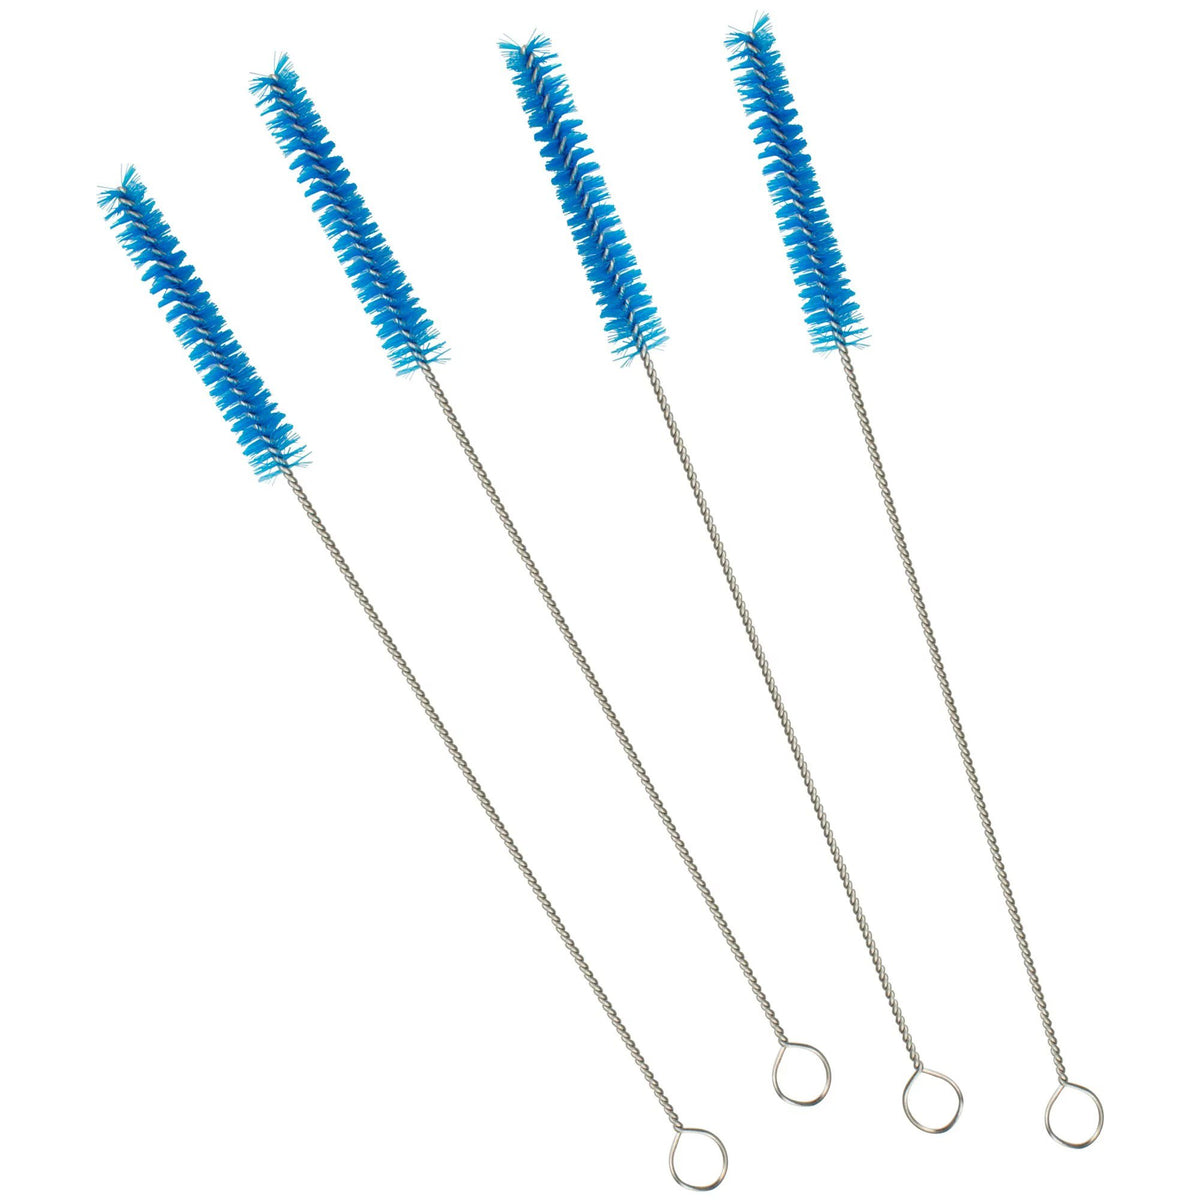 dr-browns-cleaning-brushes-4-pack- (1)